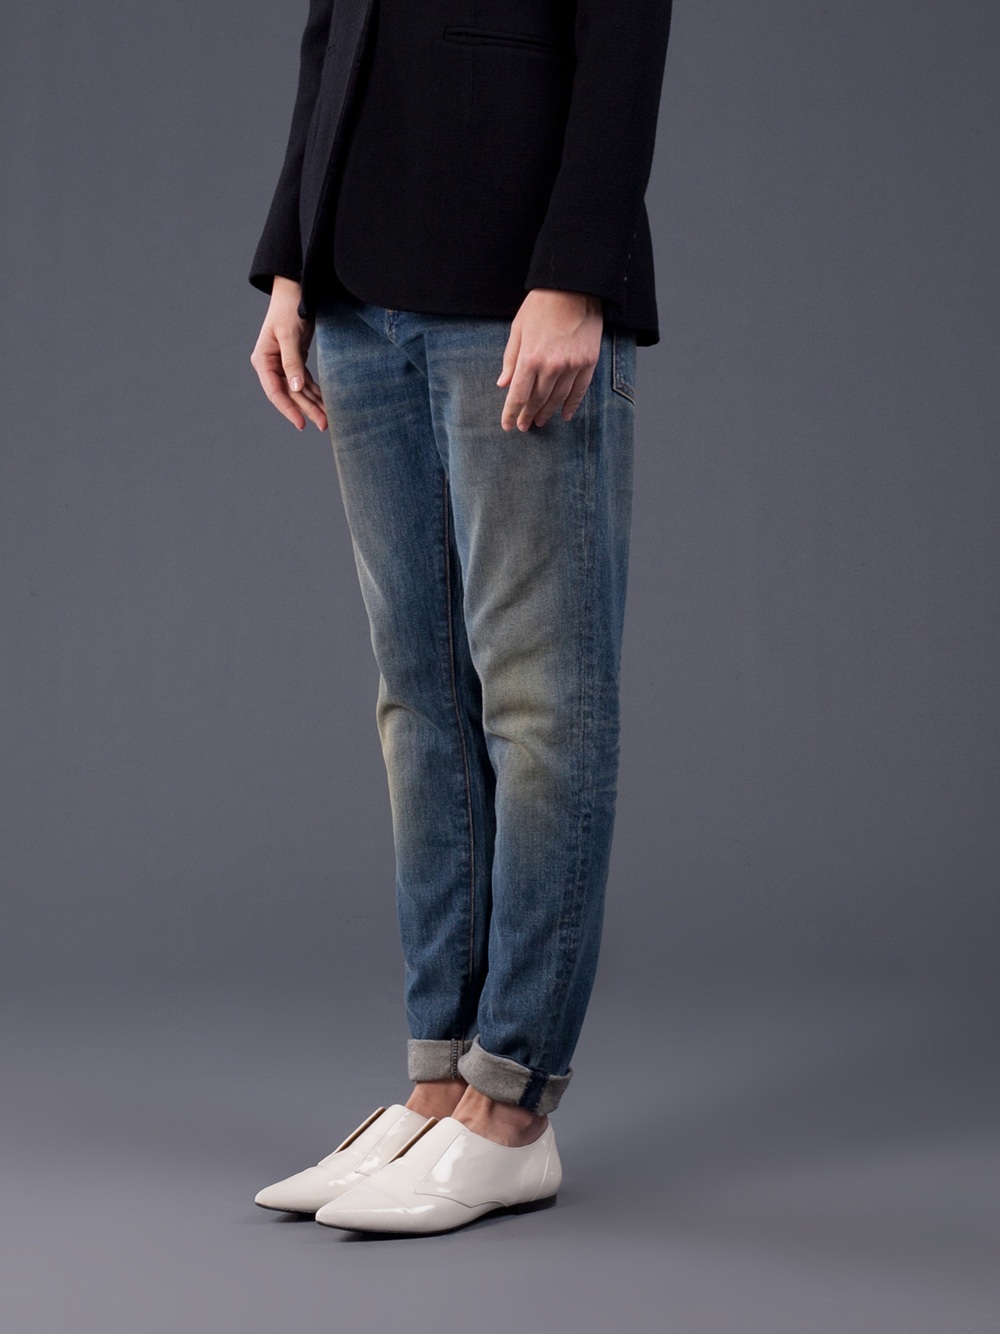 Lyst - 6397 Baggy Jeans in Blue